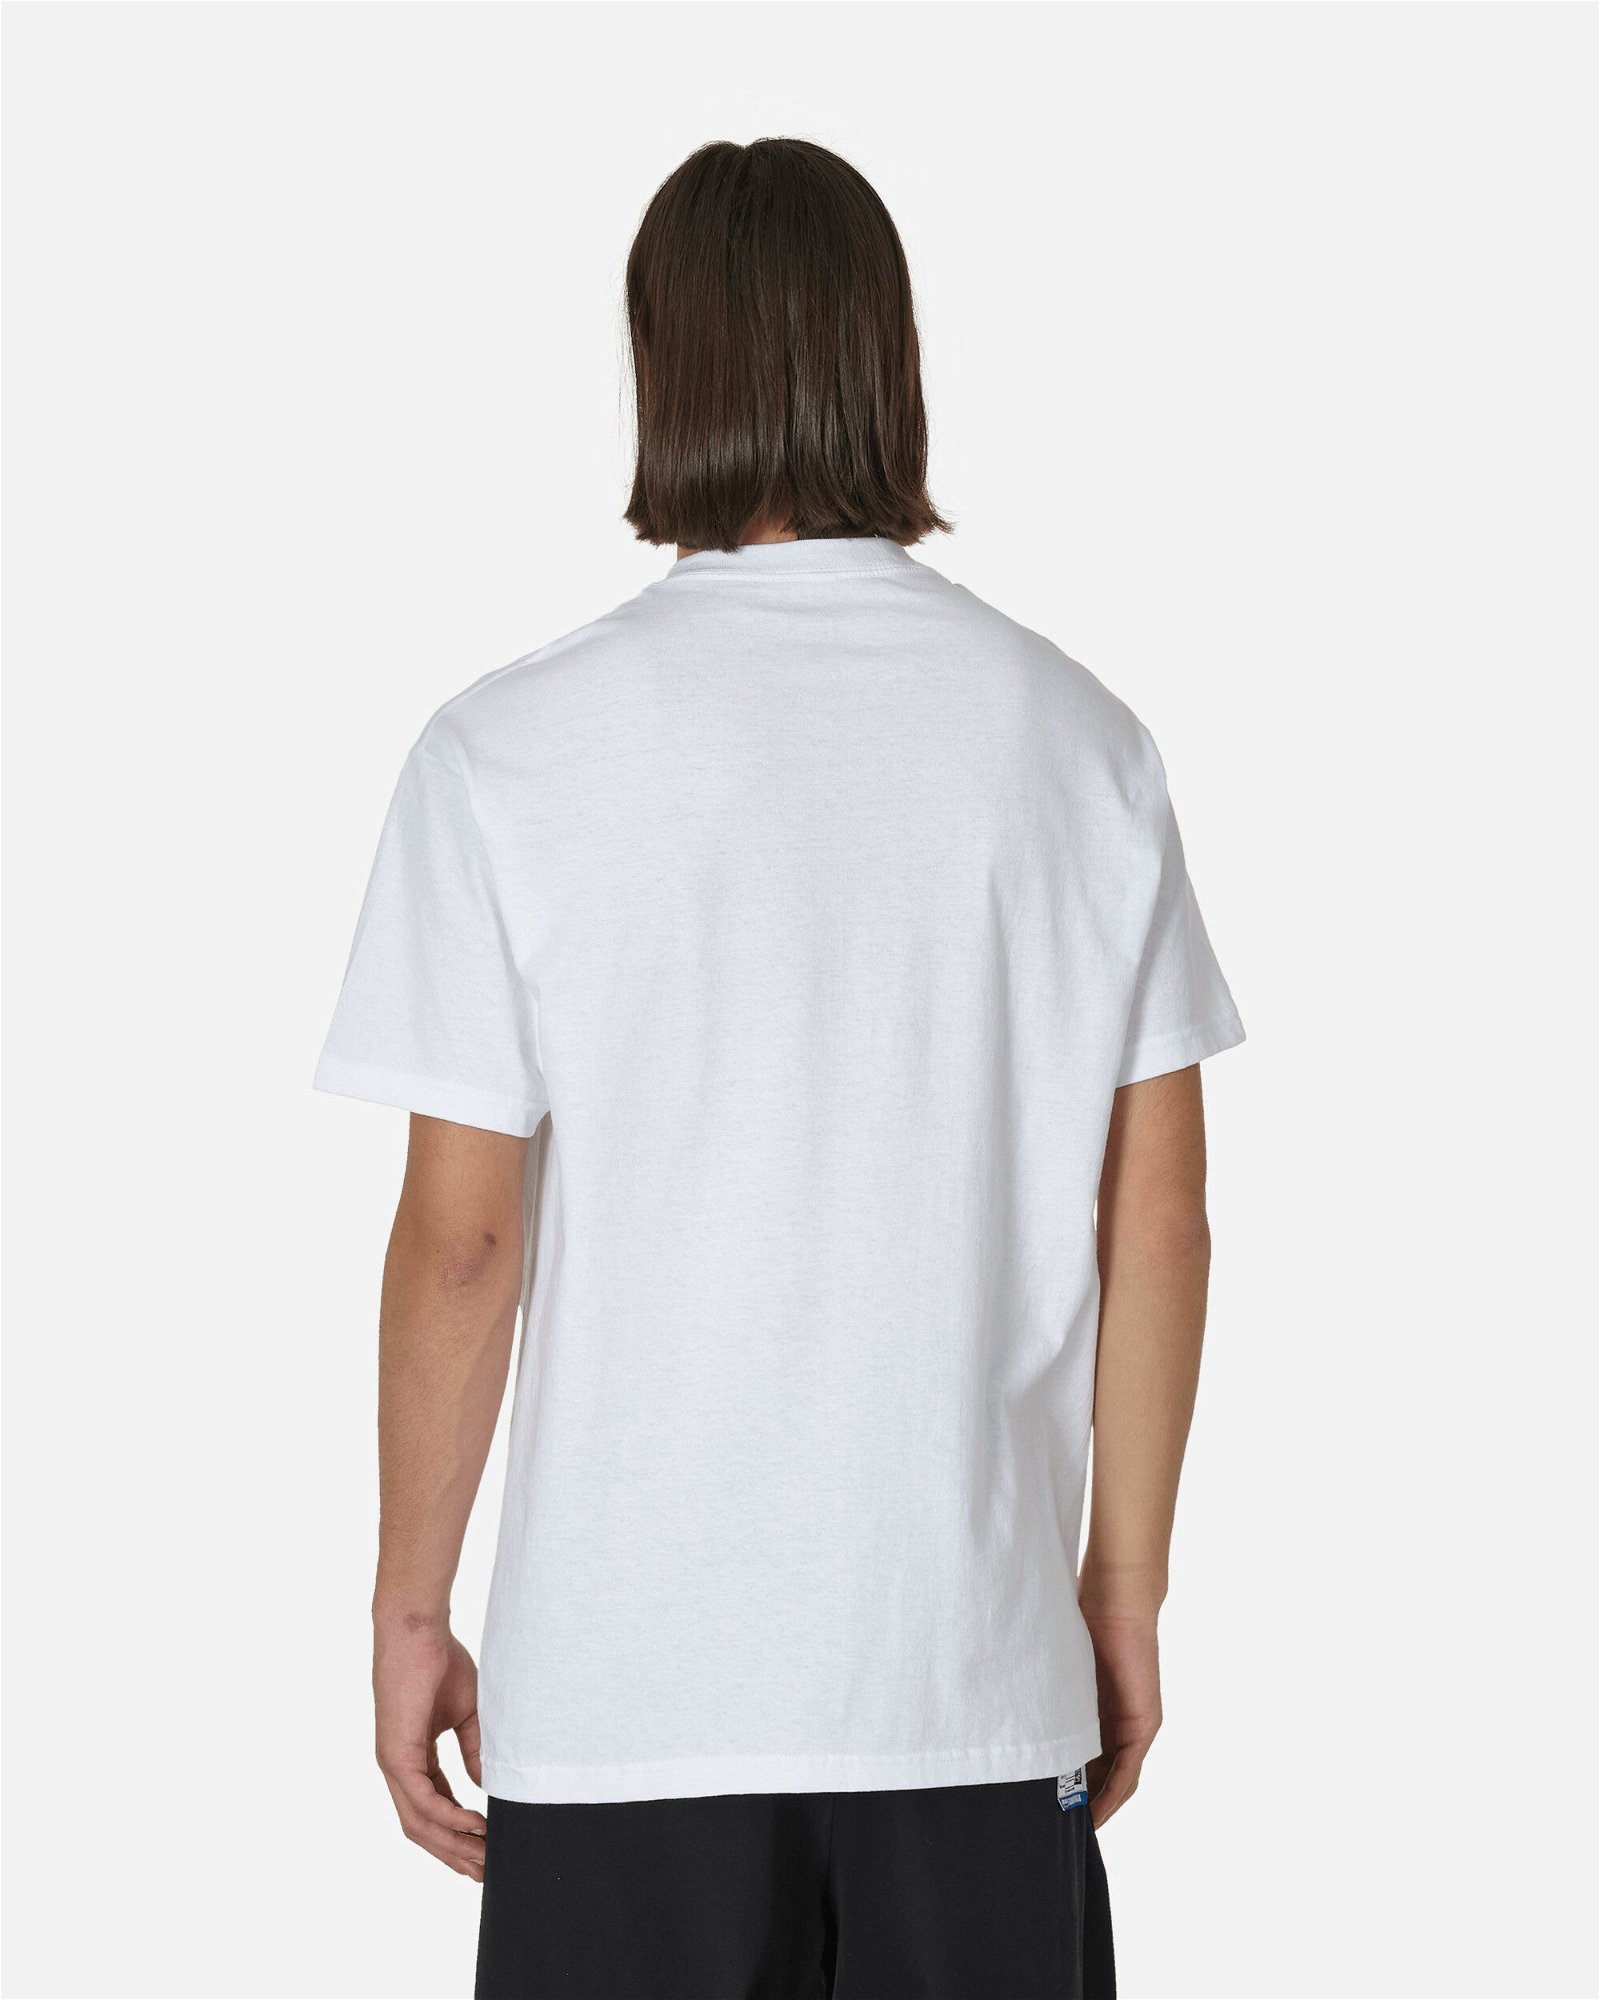 Mother T-Shirt White